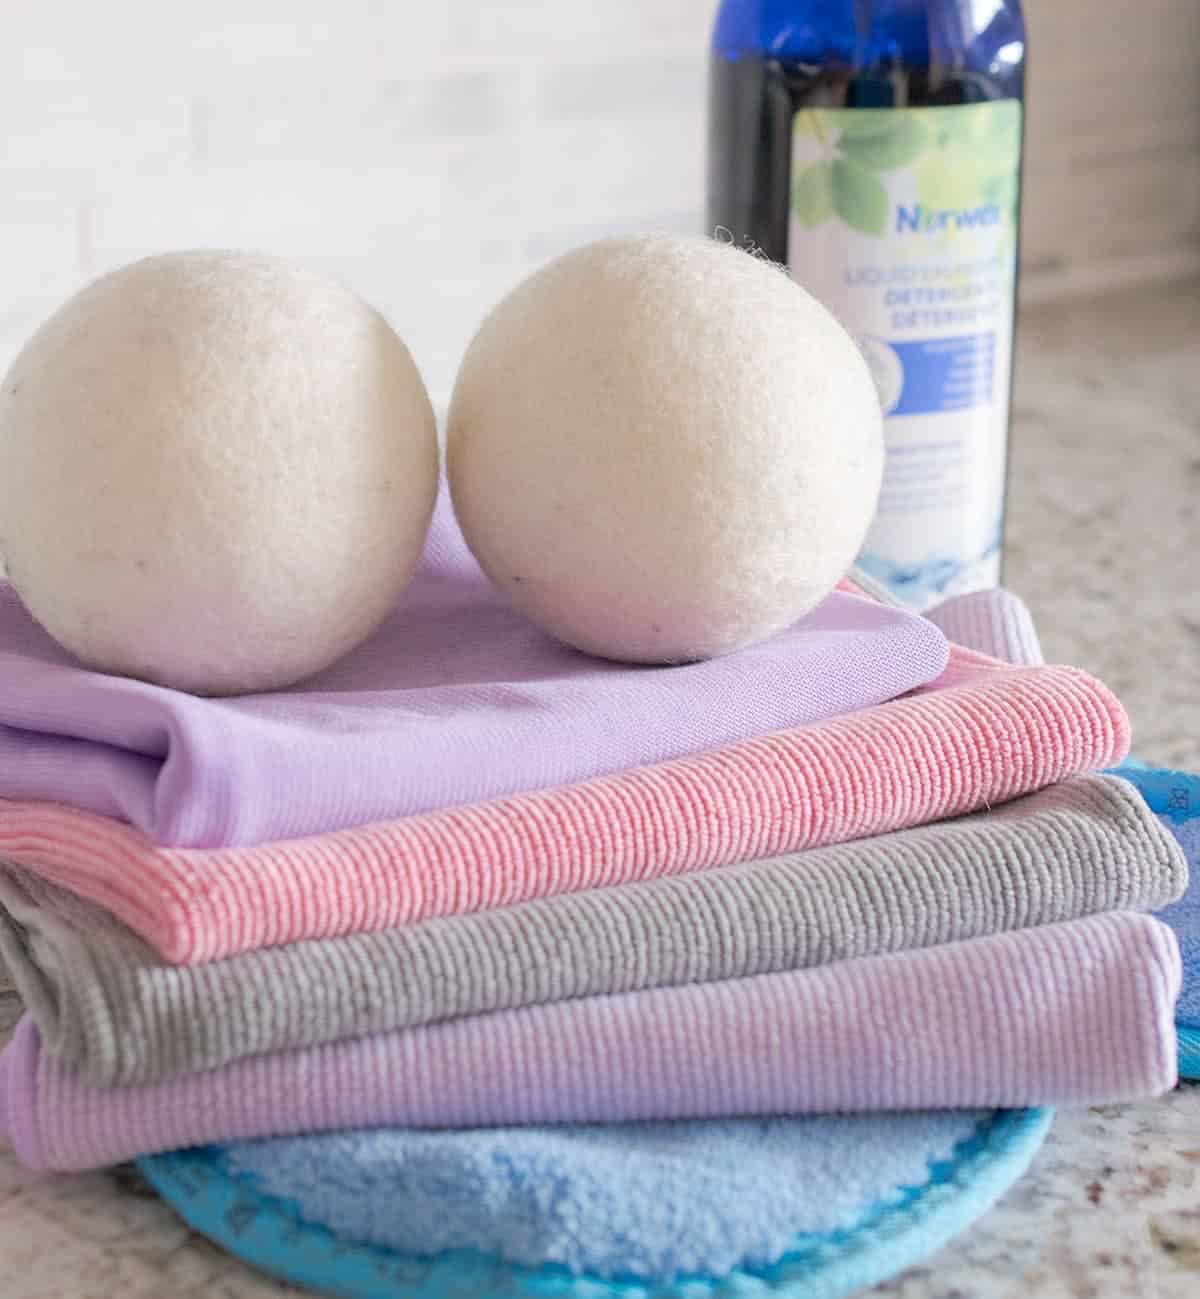 Norwex Enviro Cloth and Window Cloth and two Norwex cleaning balls, solution in background.